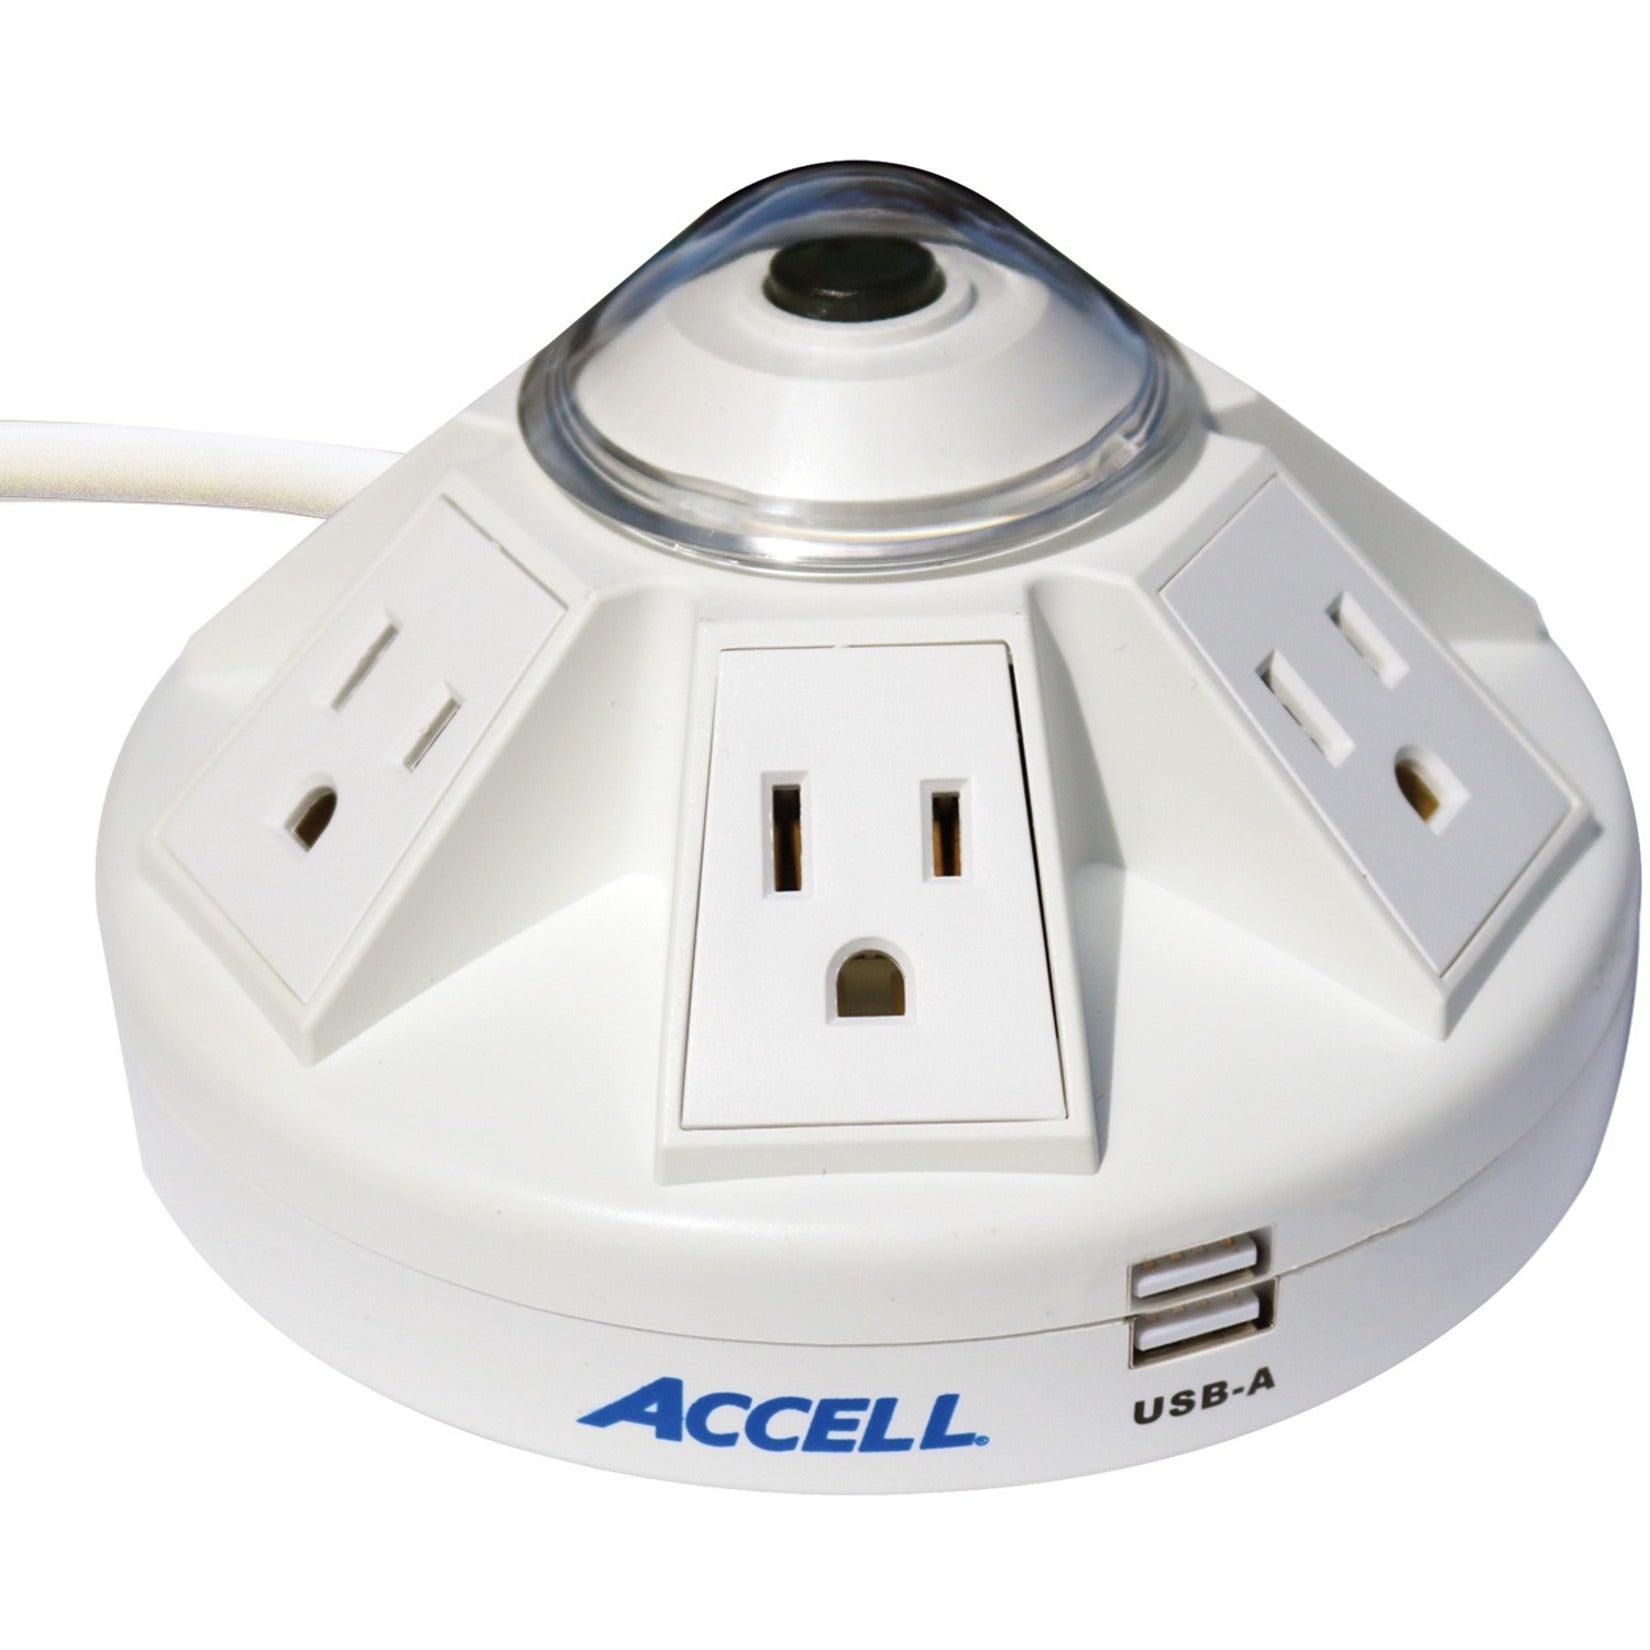 Accell D080B-014K Powramid Power Center and USB Charging Station, 6 Outlet Surge and Charging White Outlets + 2-USB, 5 Year Warranty